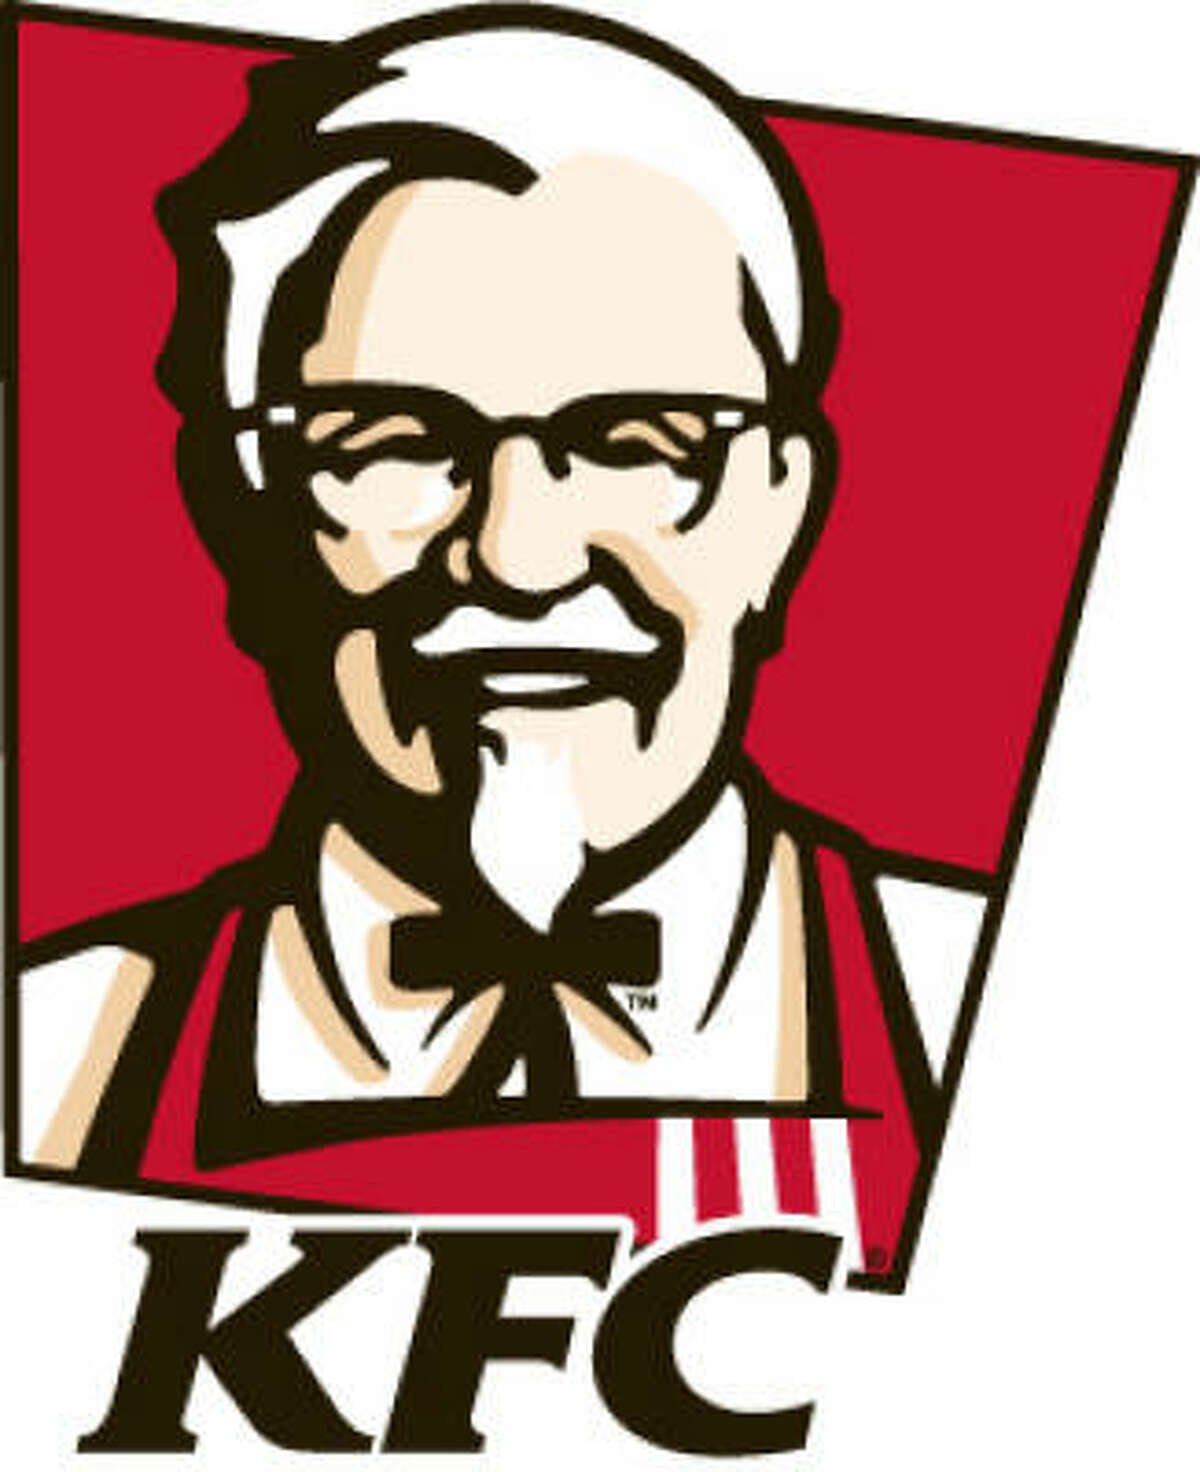 Colonel Sanders didn’t franchise Kentucky Fried Chicken until he was 65.